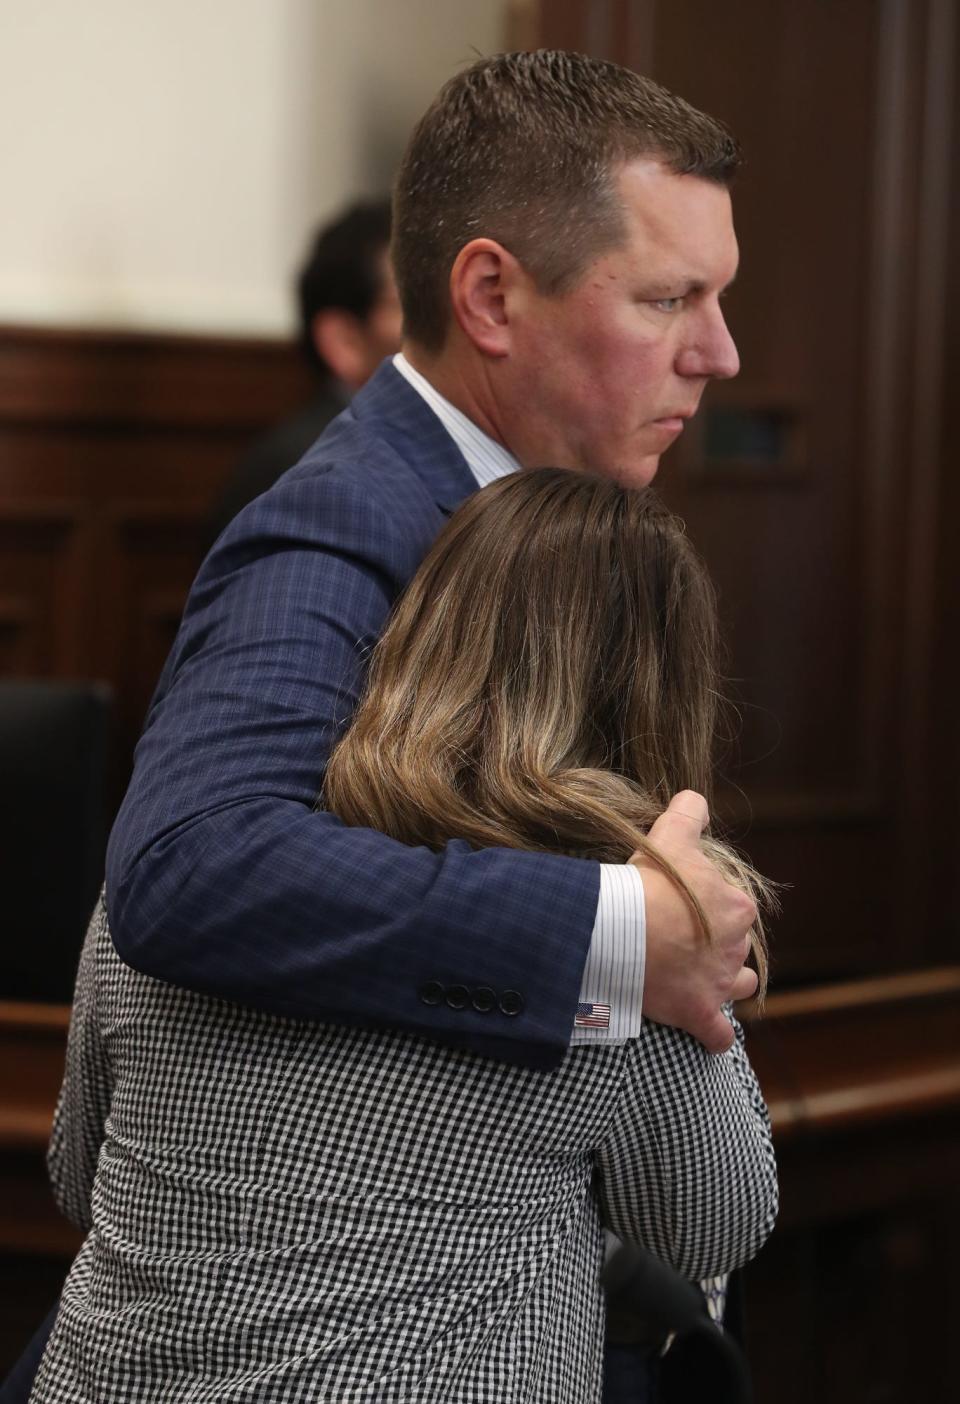 Defense attorney Don Malarcik comforts Sydney Powell after being found guilty verdict for the stabbing death of her mother after her trial in Summit County Common Pleas Judge Kelly McLaughlin's courtroom.